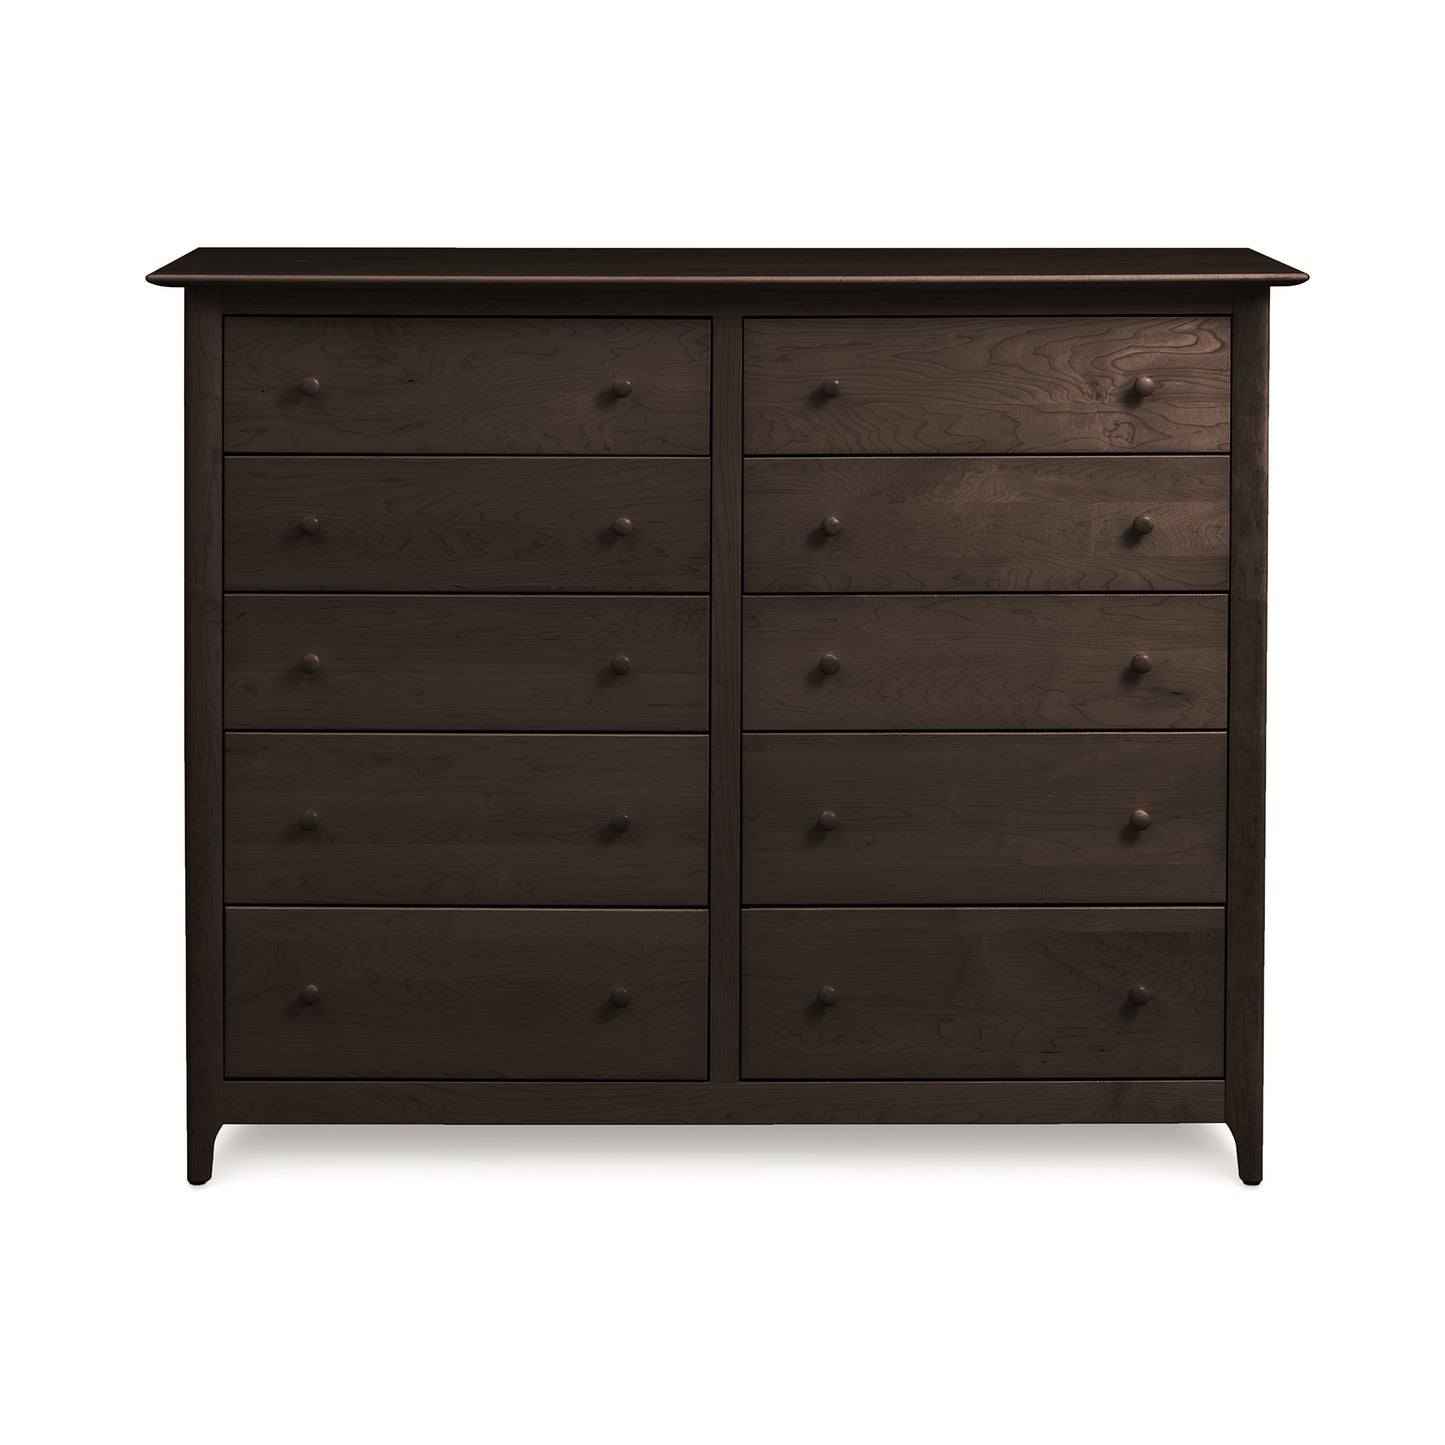 Response: A dark, eco-friendly Sarah 10-Drawer Dresser by Copeland Furniture, featuring three drawers on the left side and three slightly smaller drawers on the right side, all with round knobs, against a plain white background.